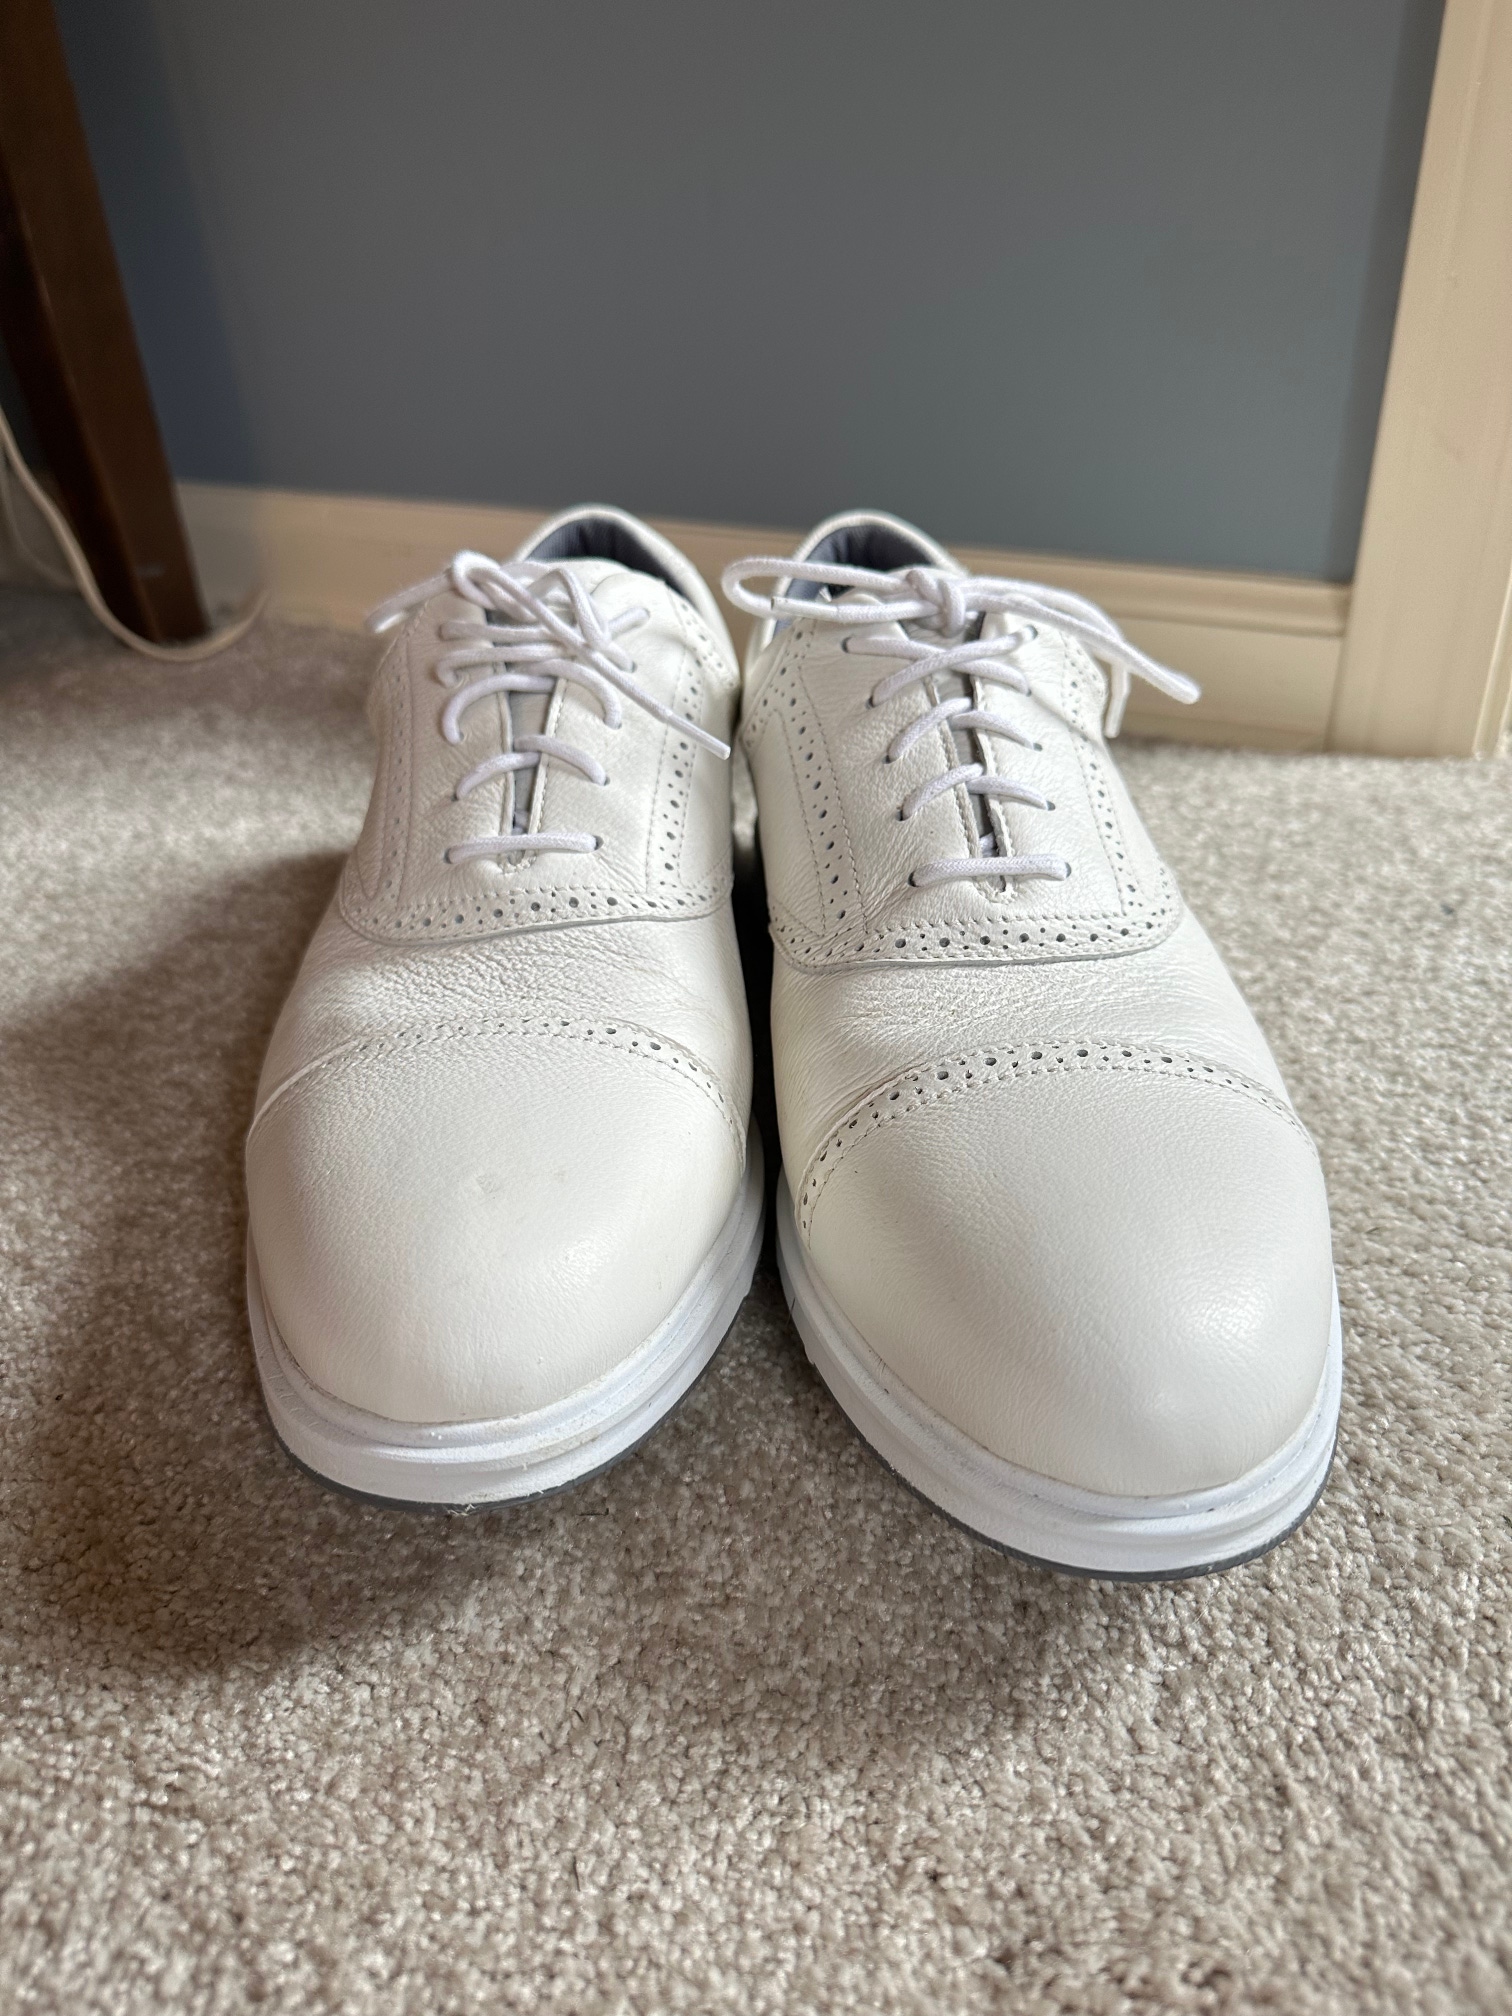 Almost new Rockport Golf Shoes -  Men's Size 11.5 WIDE (Women's 12.5)